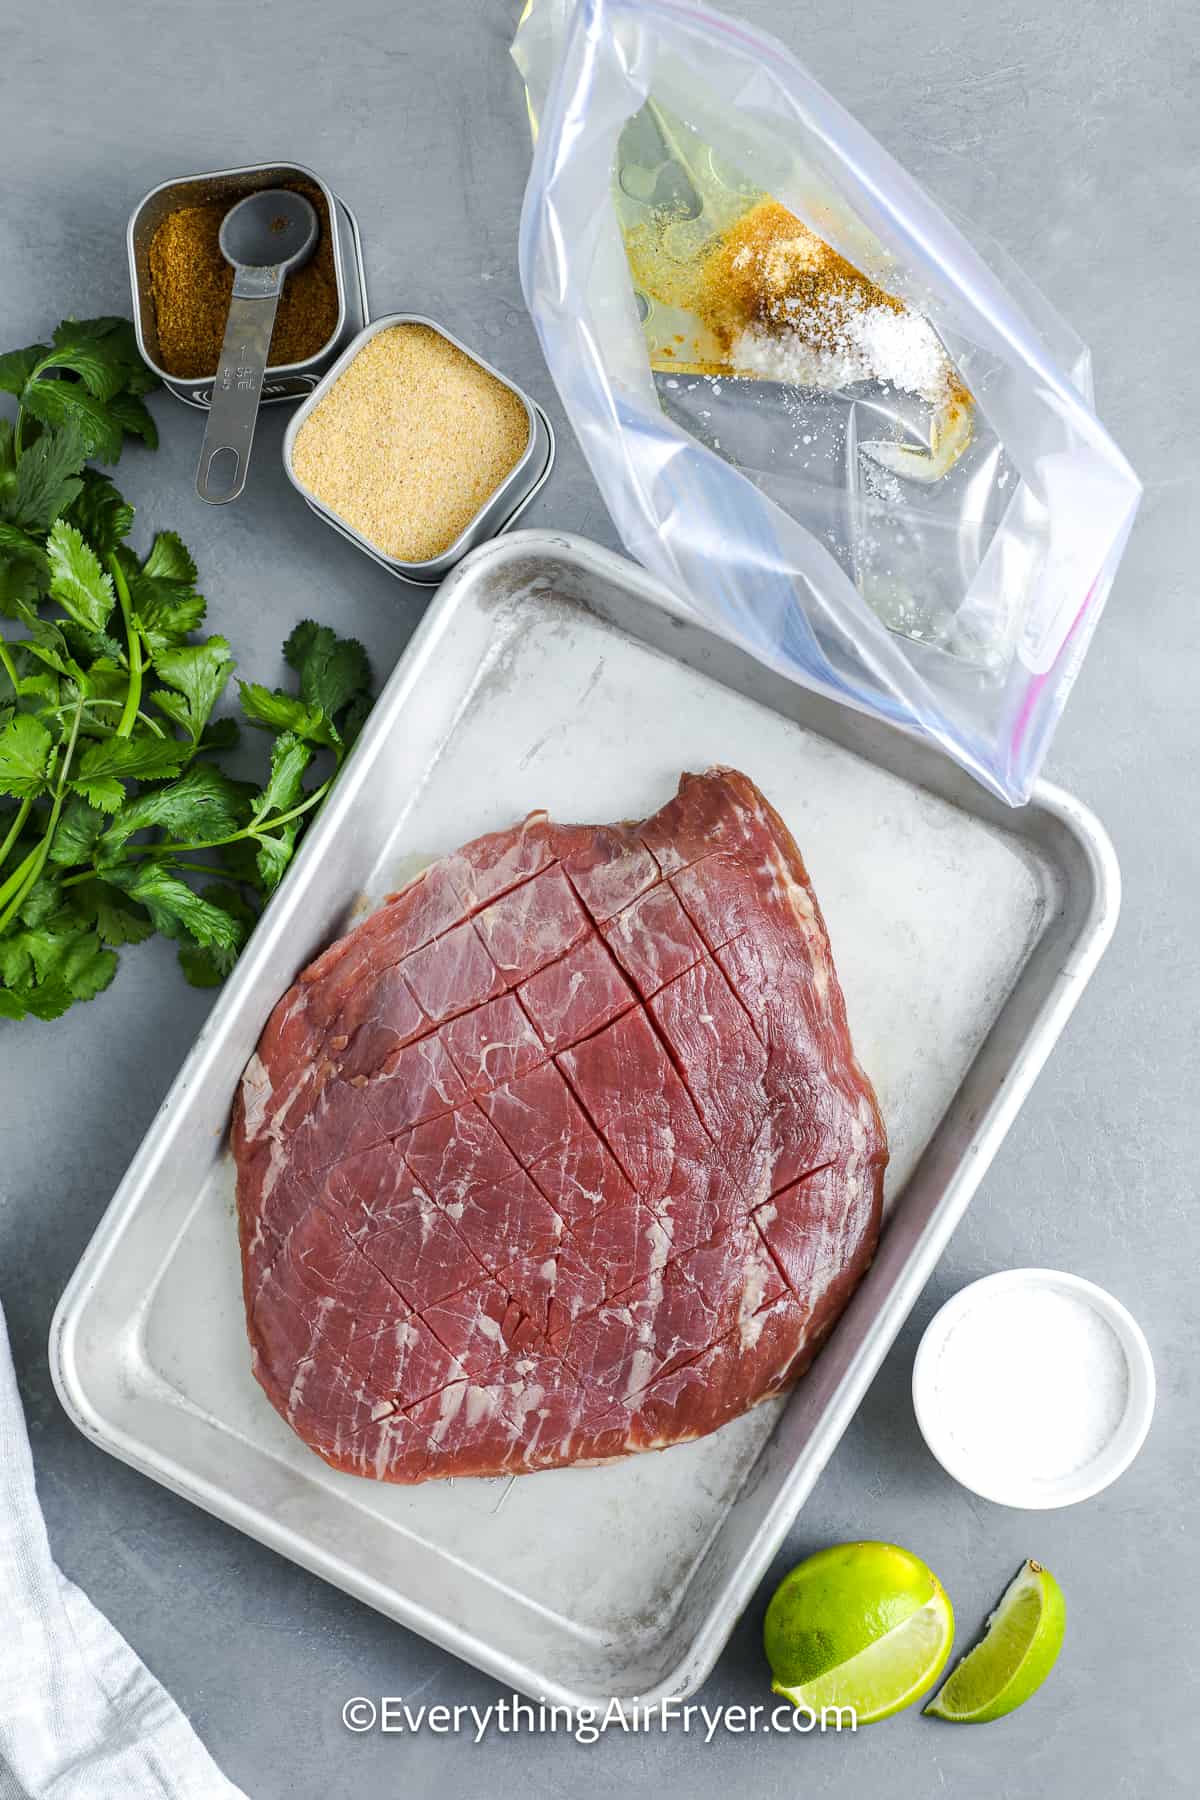 Ingredients to make Air Fryer Flank Steak with the marinade prepared in a zippered bag